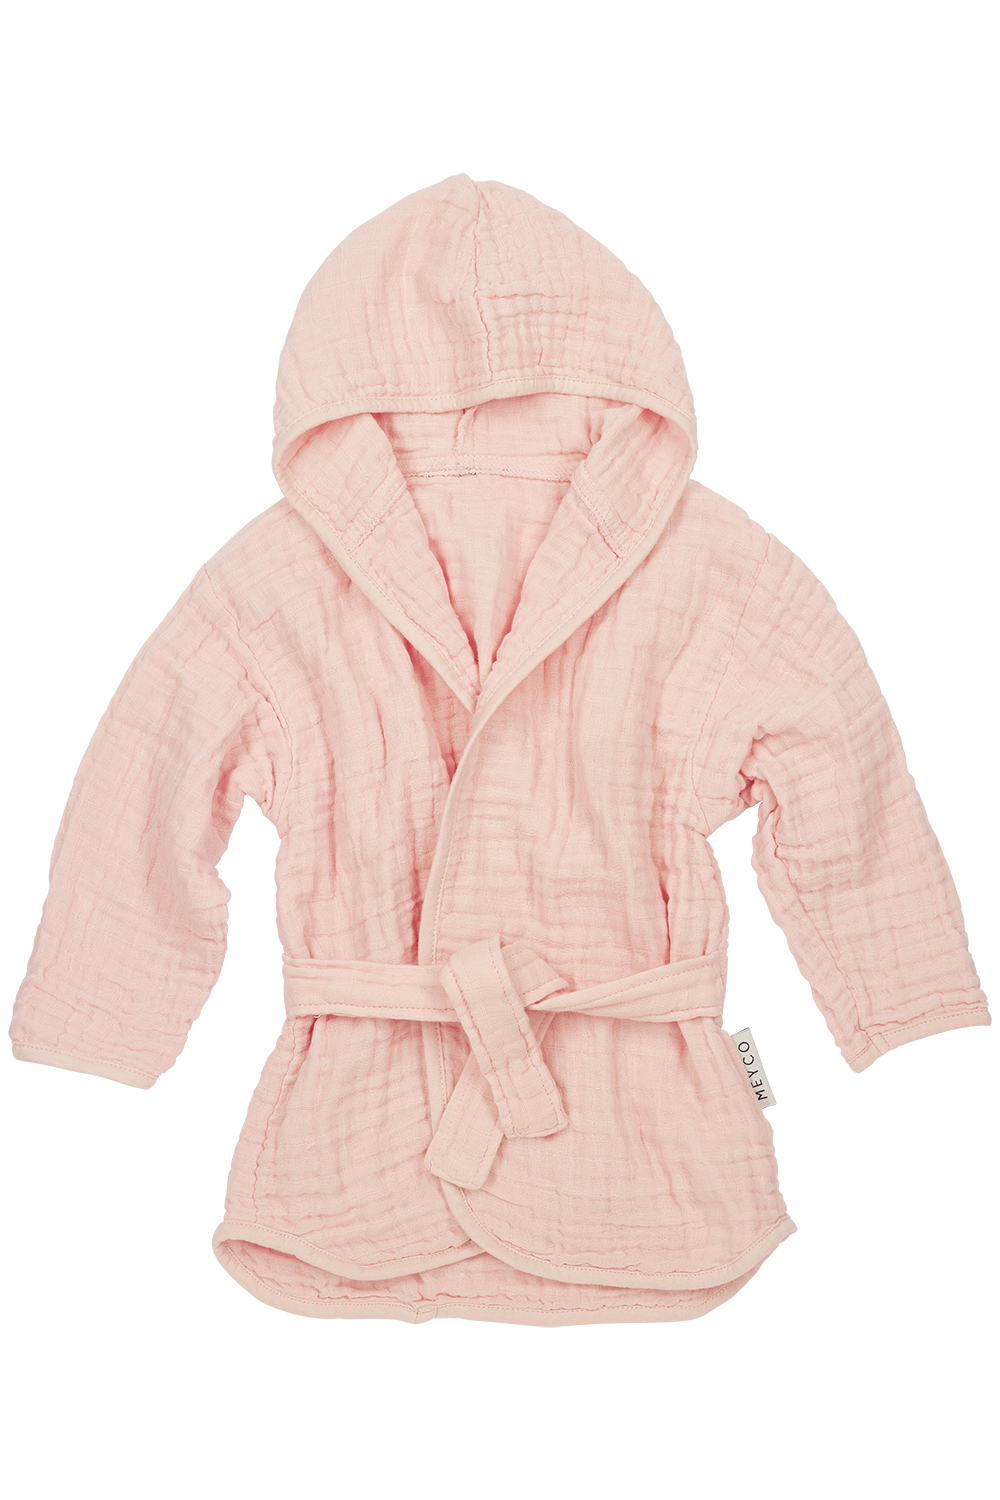 Bademantel pre-washed musselin Uni - soft pink - 98/104